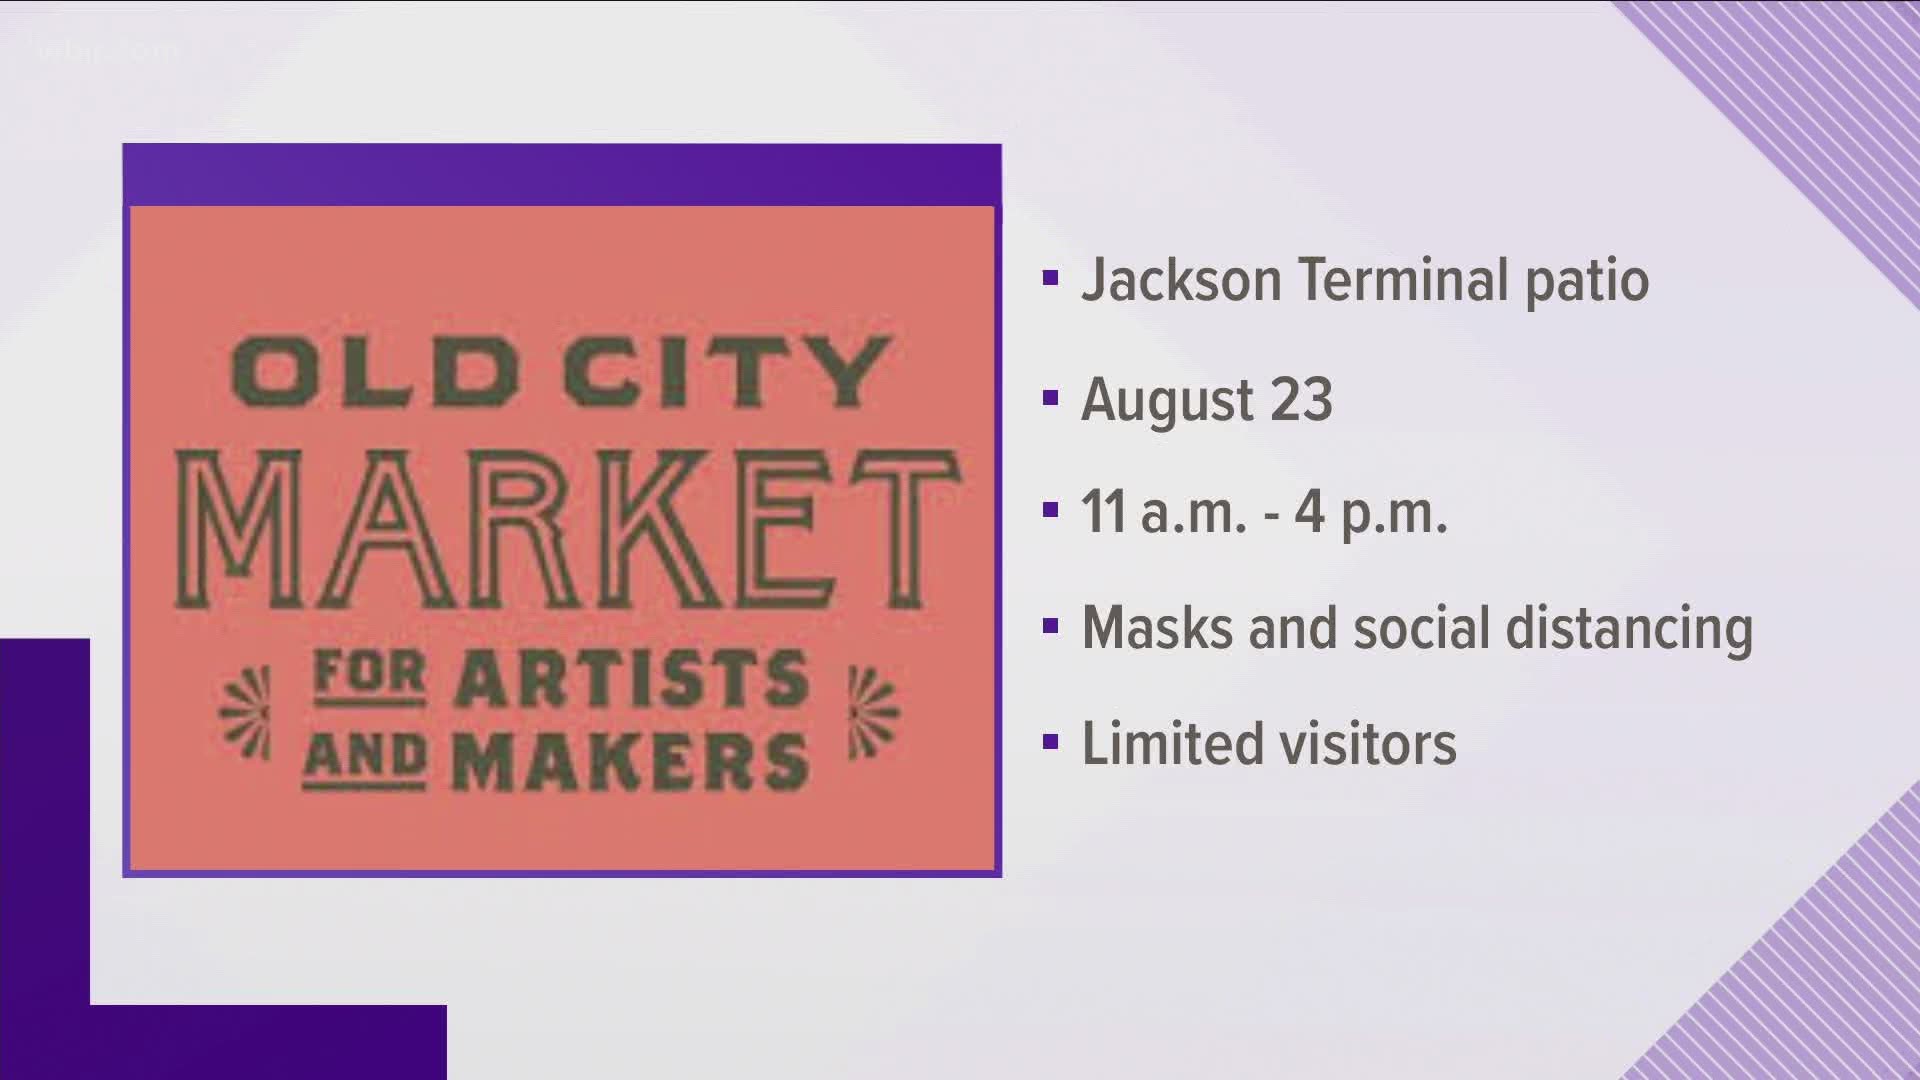 It will be on the patio of Jackson Terminal starting on Sunday, August 23 from 11 a.m. to 4 p.m.